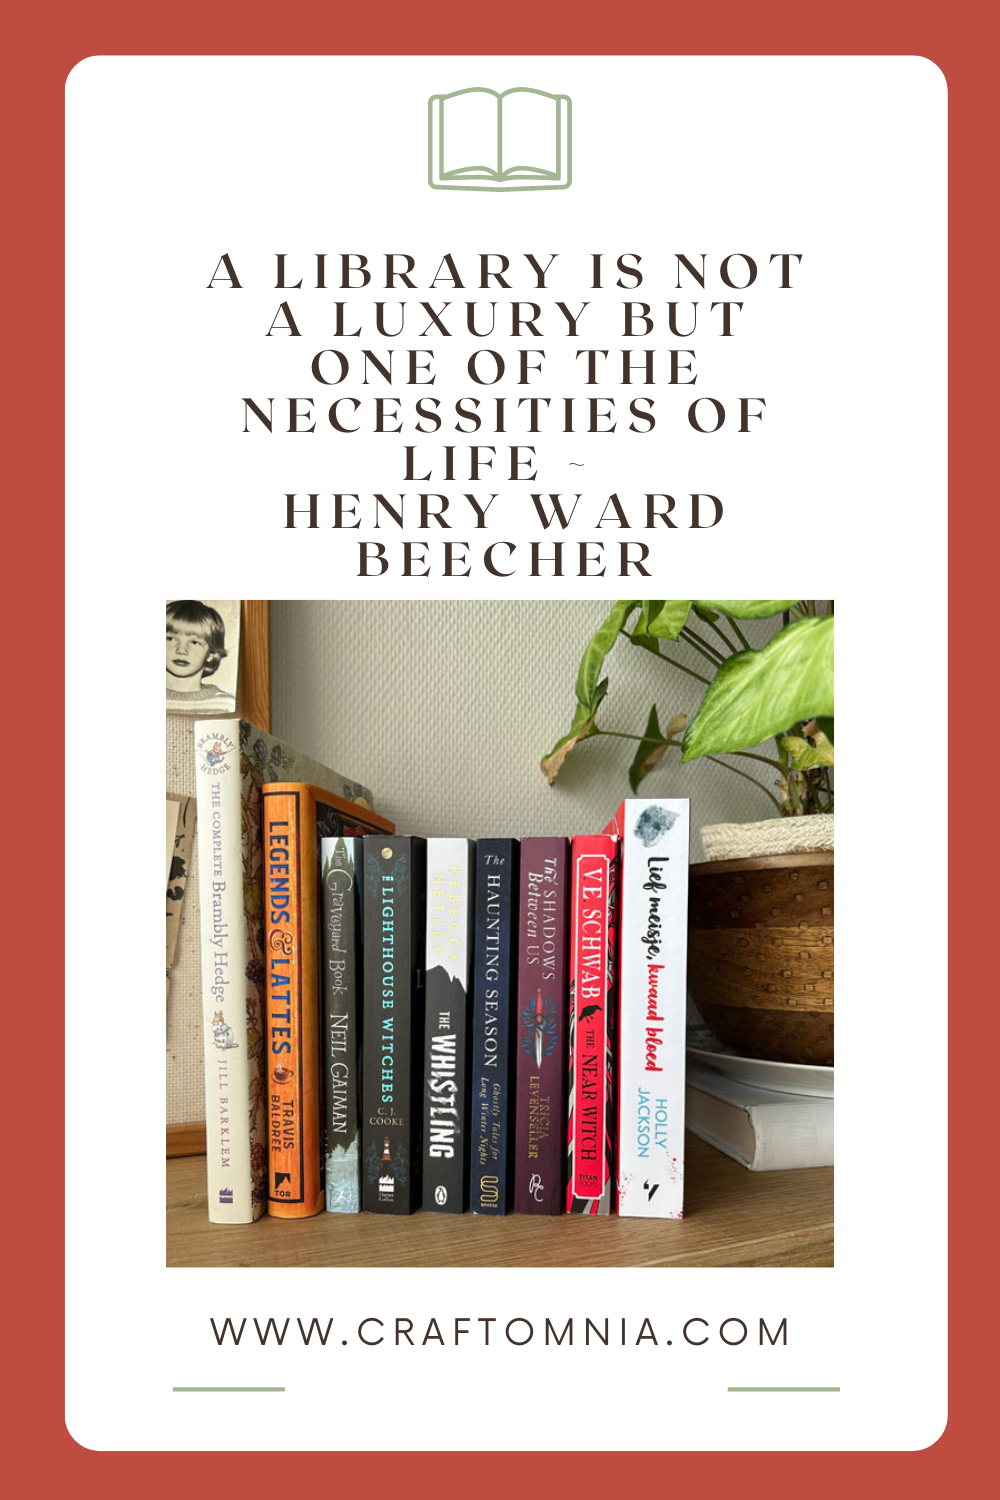 A library is not a luxury but one of the necessities of life. Quote van Henry Ward Beecher